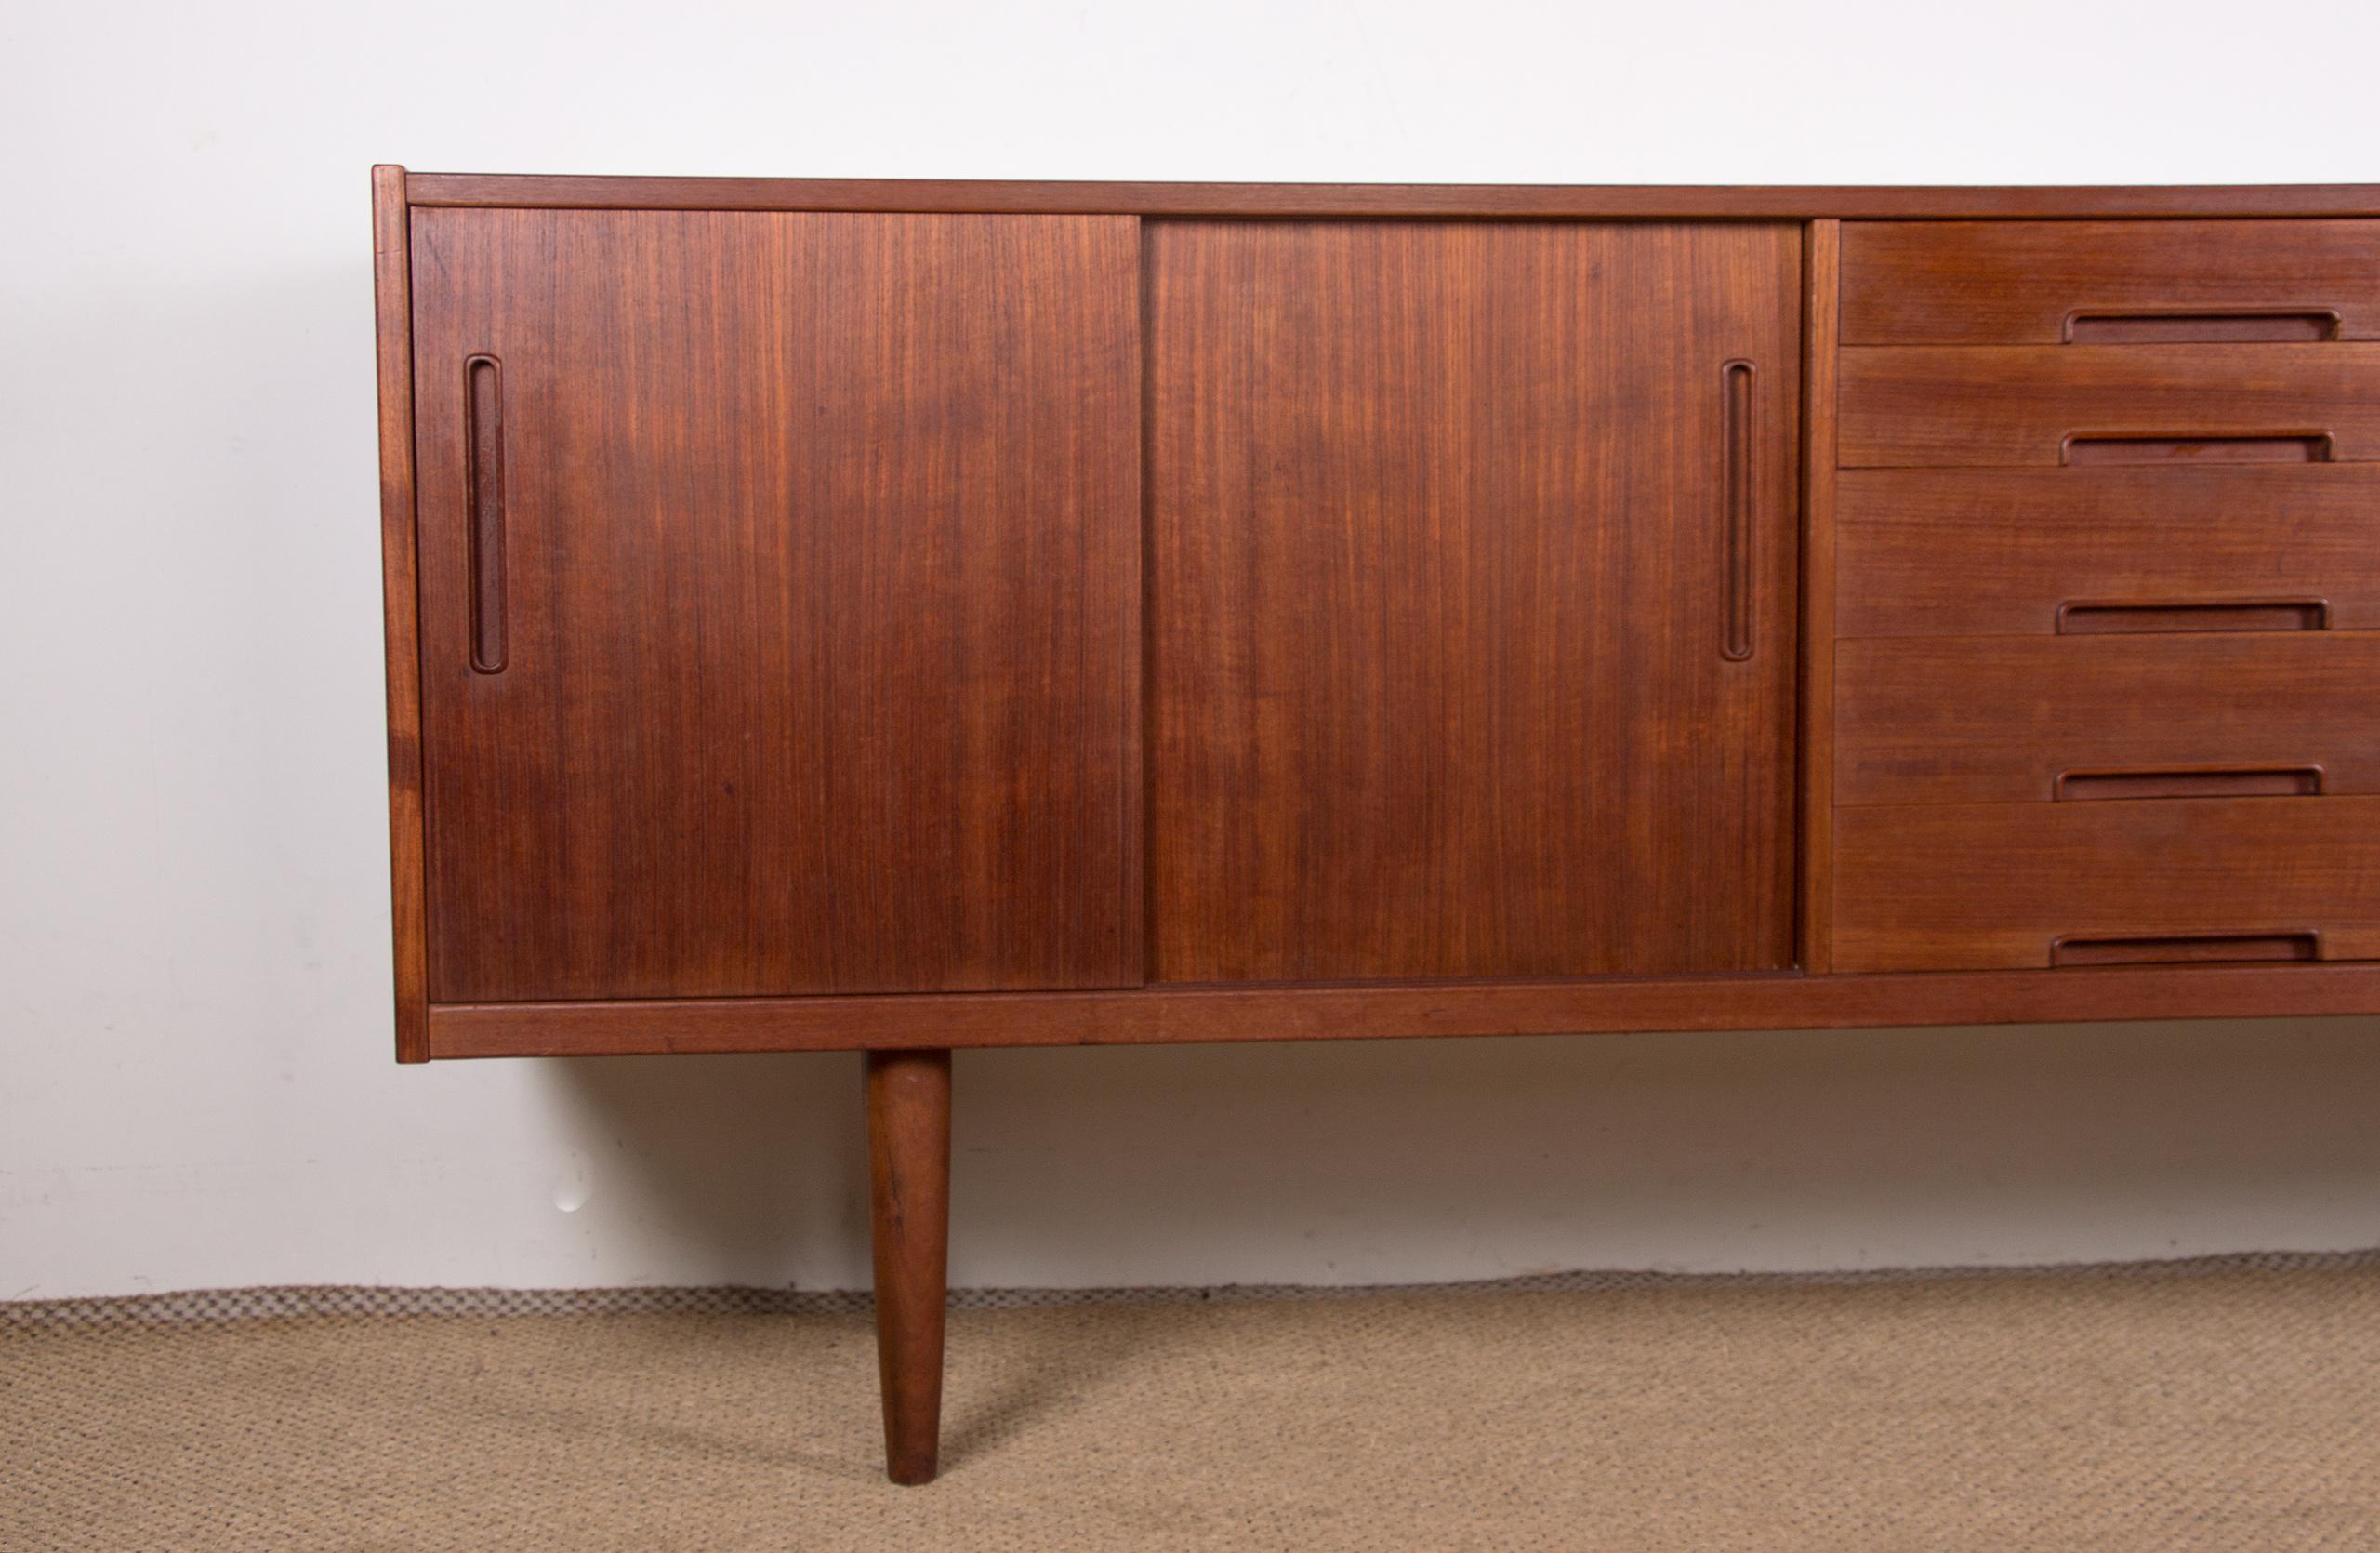 Superb Scandinavian sideboard. 2 times 2 doors on the sides open onto 2 large shelves, 5 drawers of different sizes in the middle. Furniture with a very elegant modernist design, very good manufacturing quality, large storage capacity.